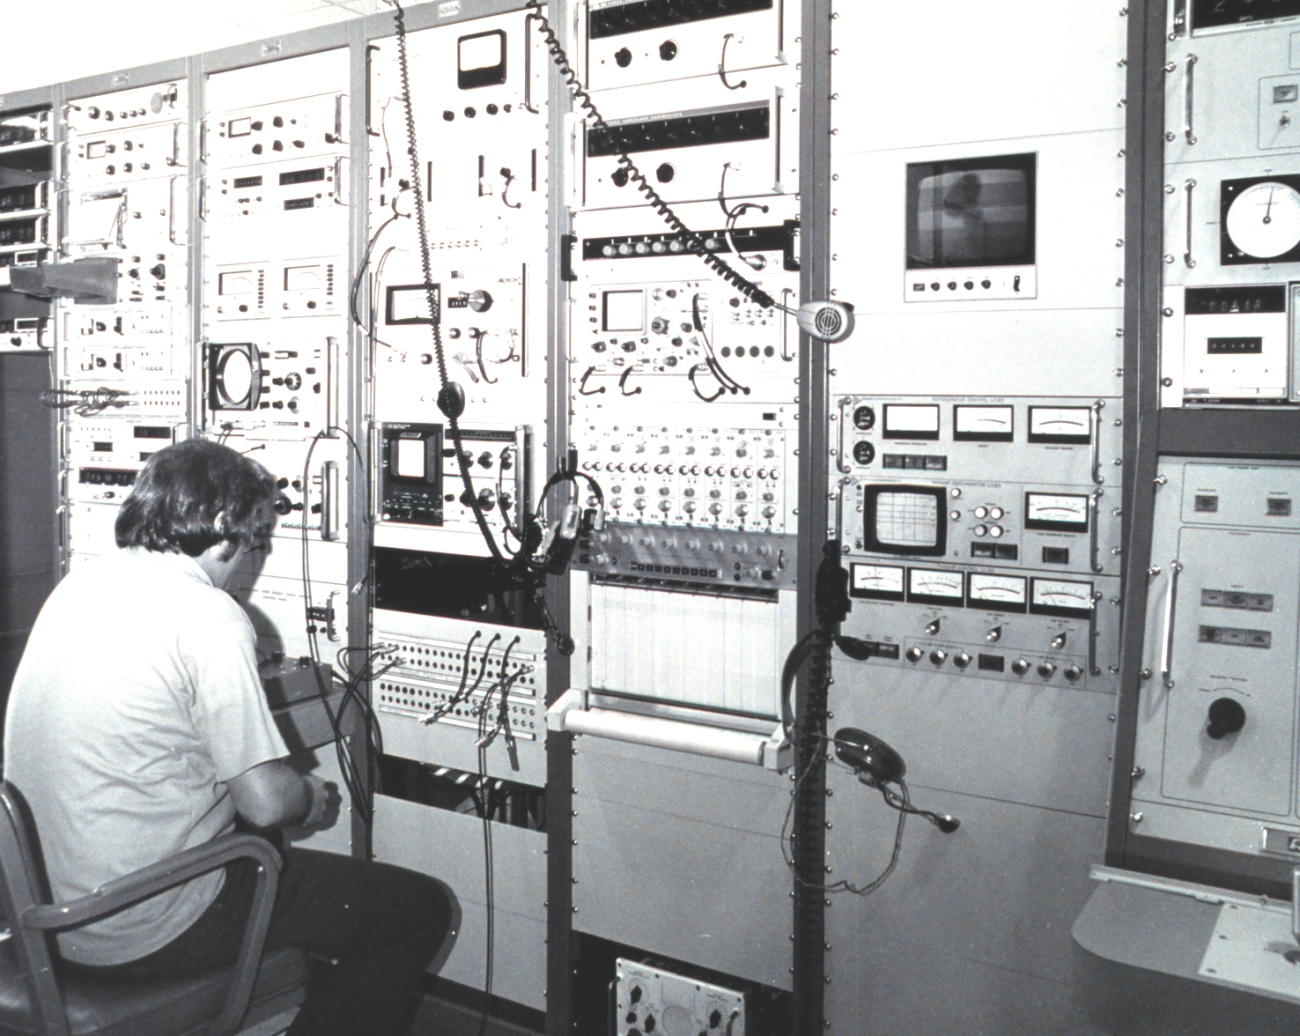 An engineer checking some of the electronics associated with satellite datareception and processing